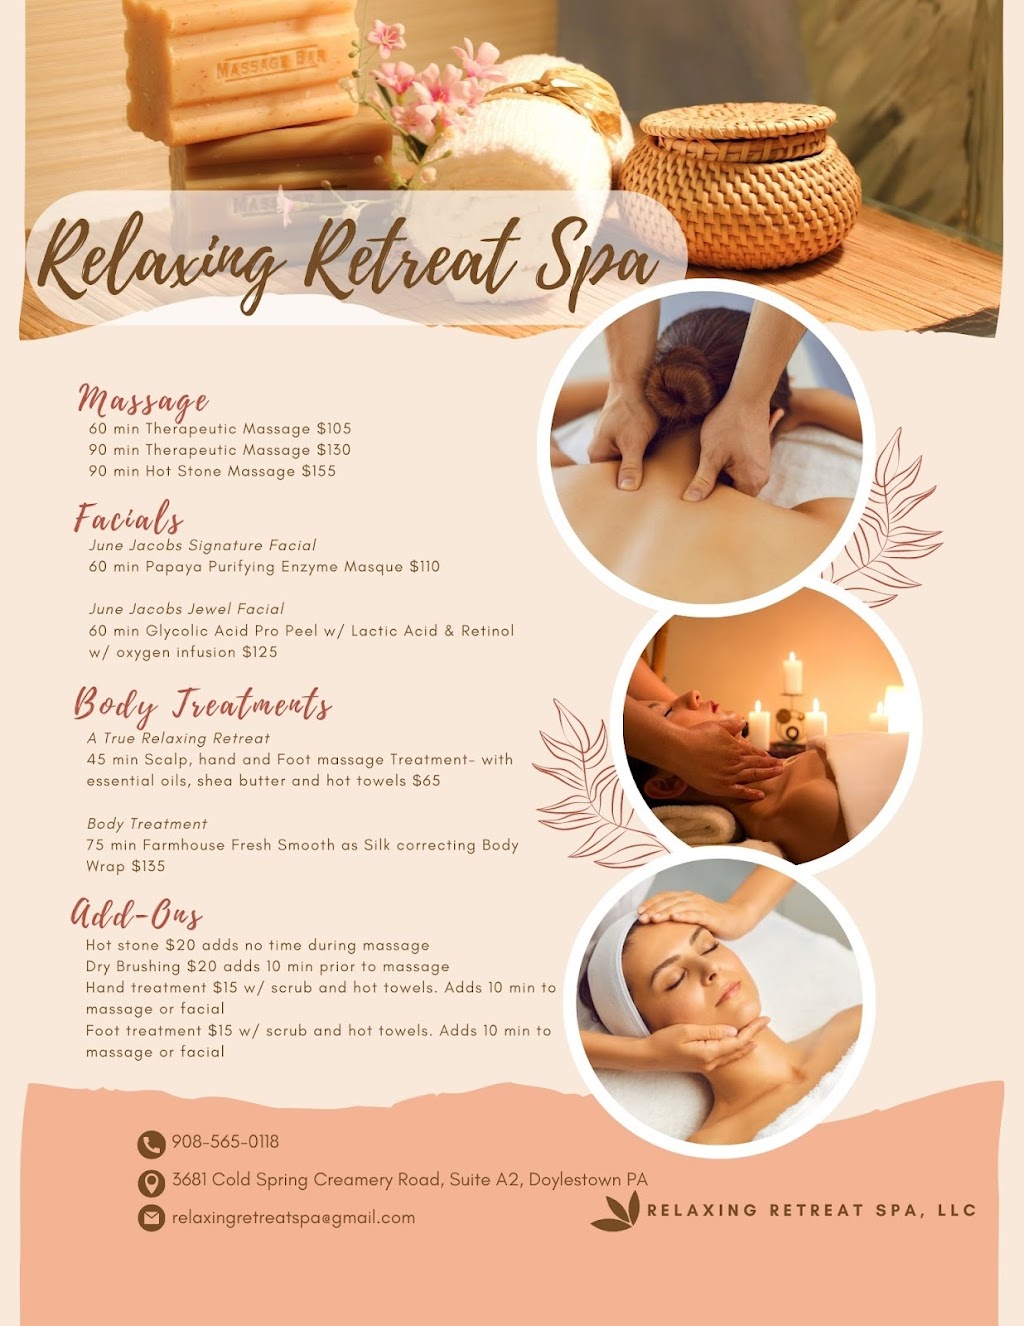 Relaxing Retreat Spa, LLC | 3681 Cold Spring Creamery Rd Suite A2, Doylestown, PA 18902 | Phone: (908) 565-0118